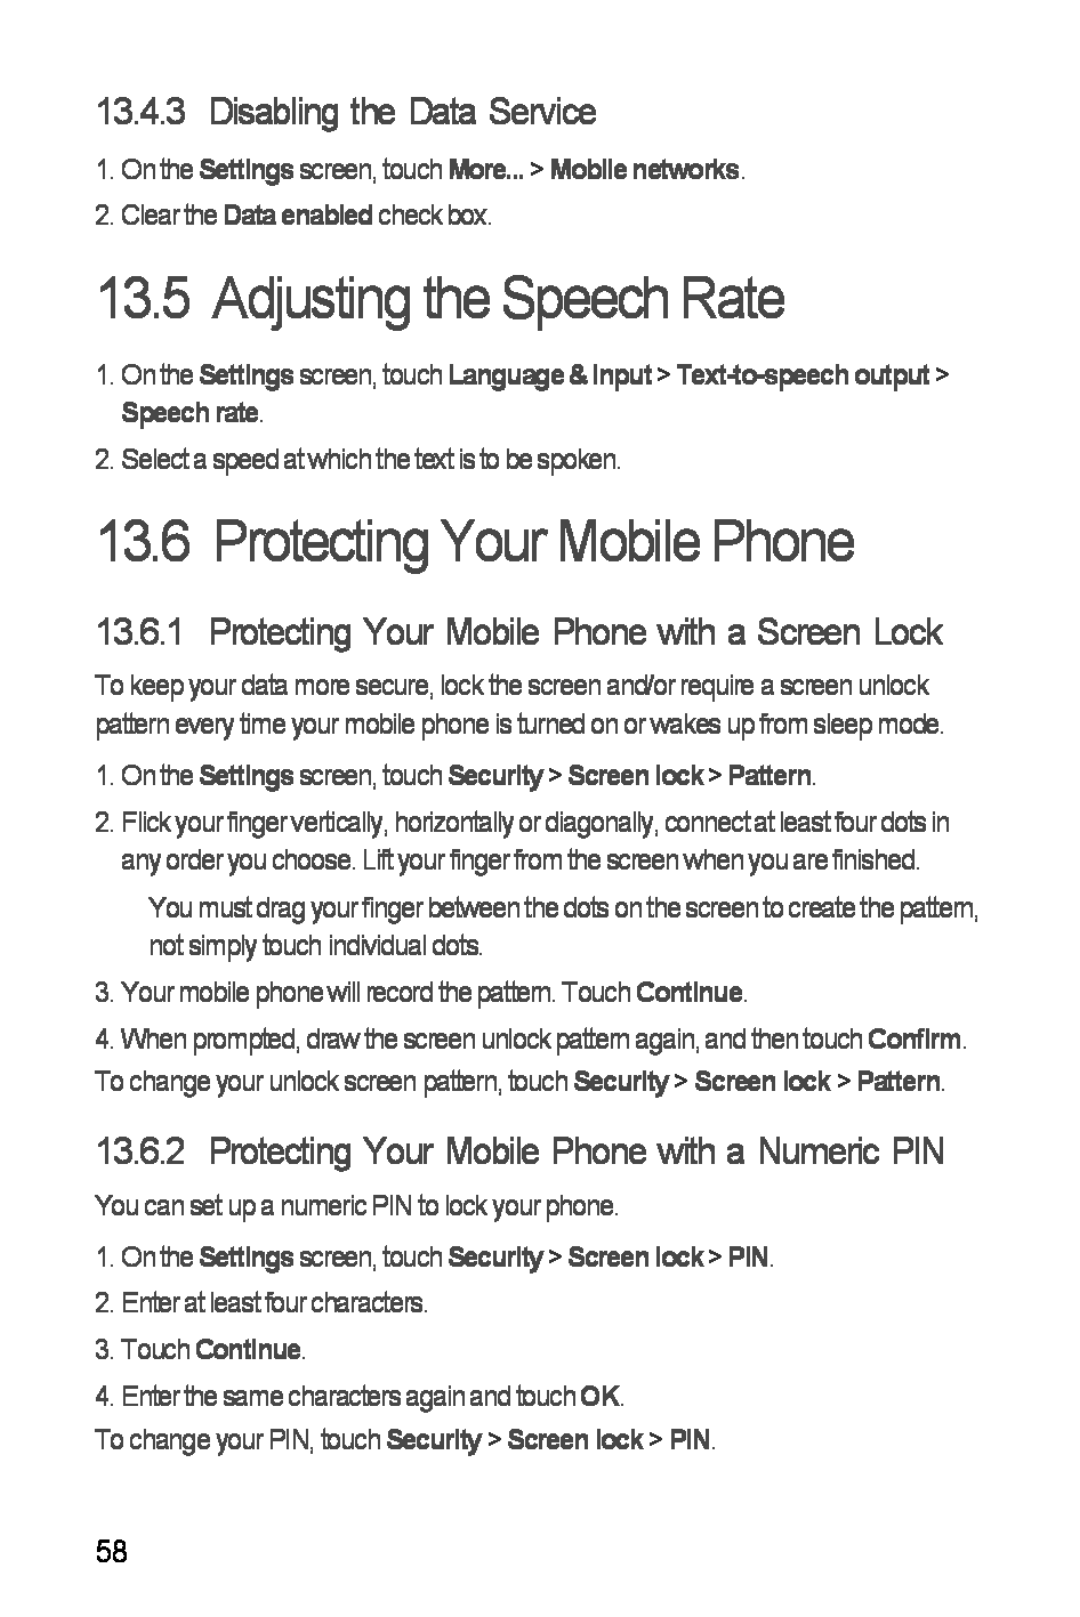 Huawei H881C manual Adjusting the Speech Rate, Protecting Your Mobile Phone, Disabling the Data Service, Touch Continue 